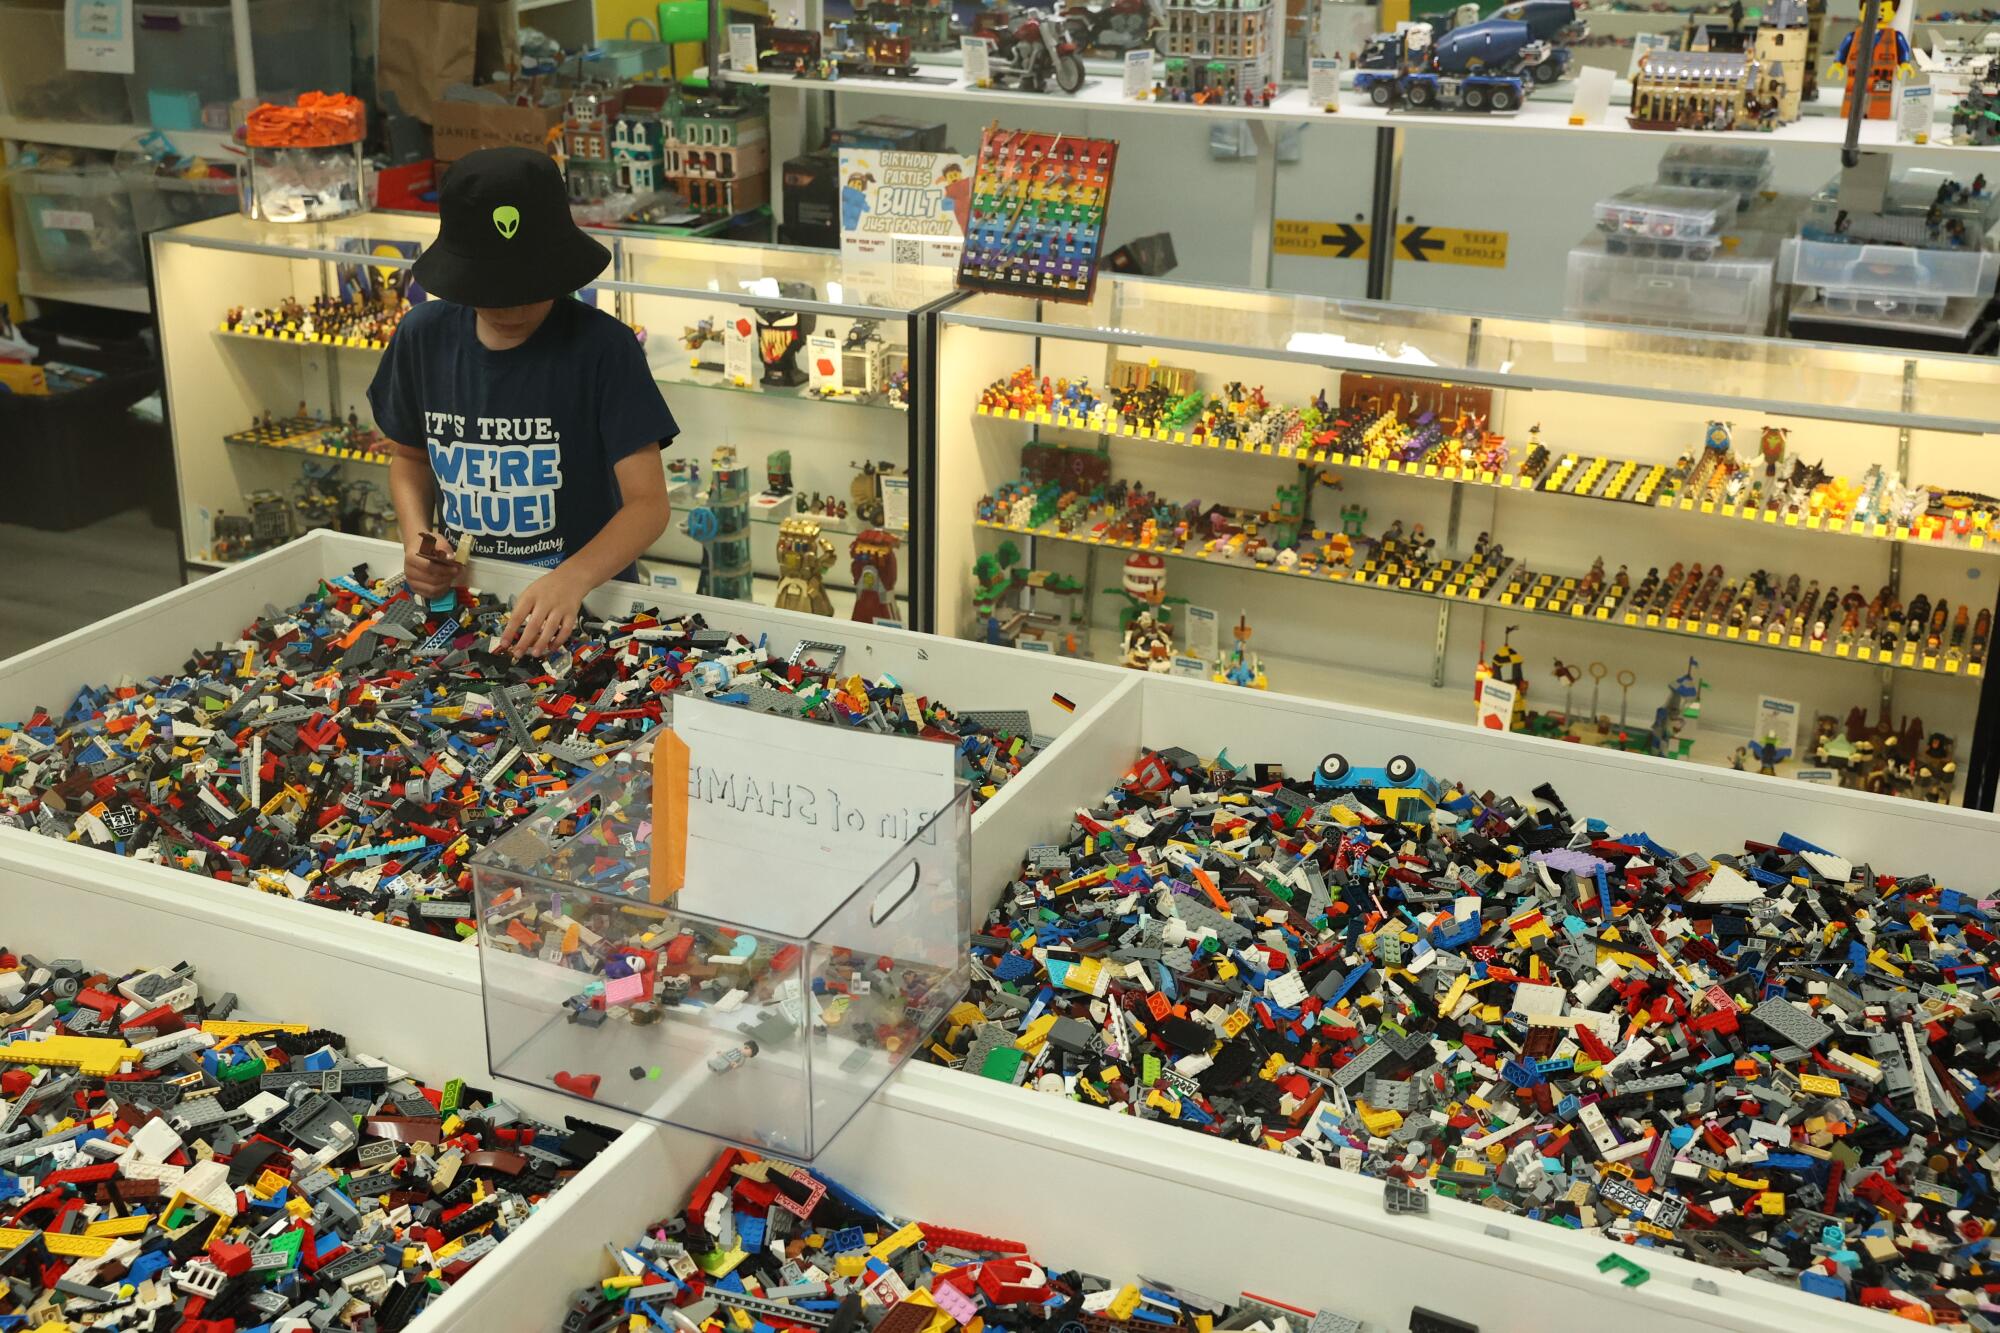 How Lego went from humble toy to black market item fueling crime spree ...